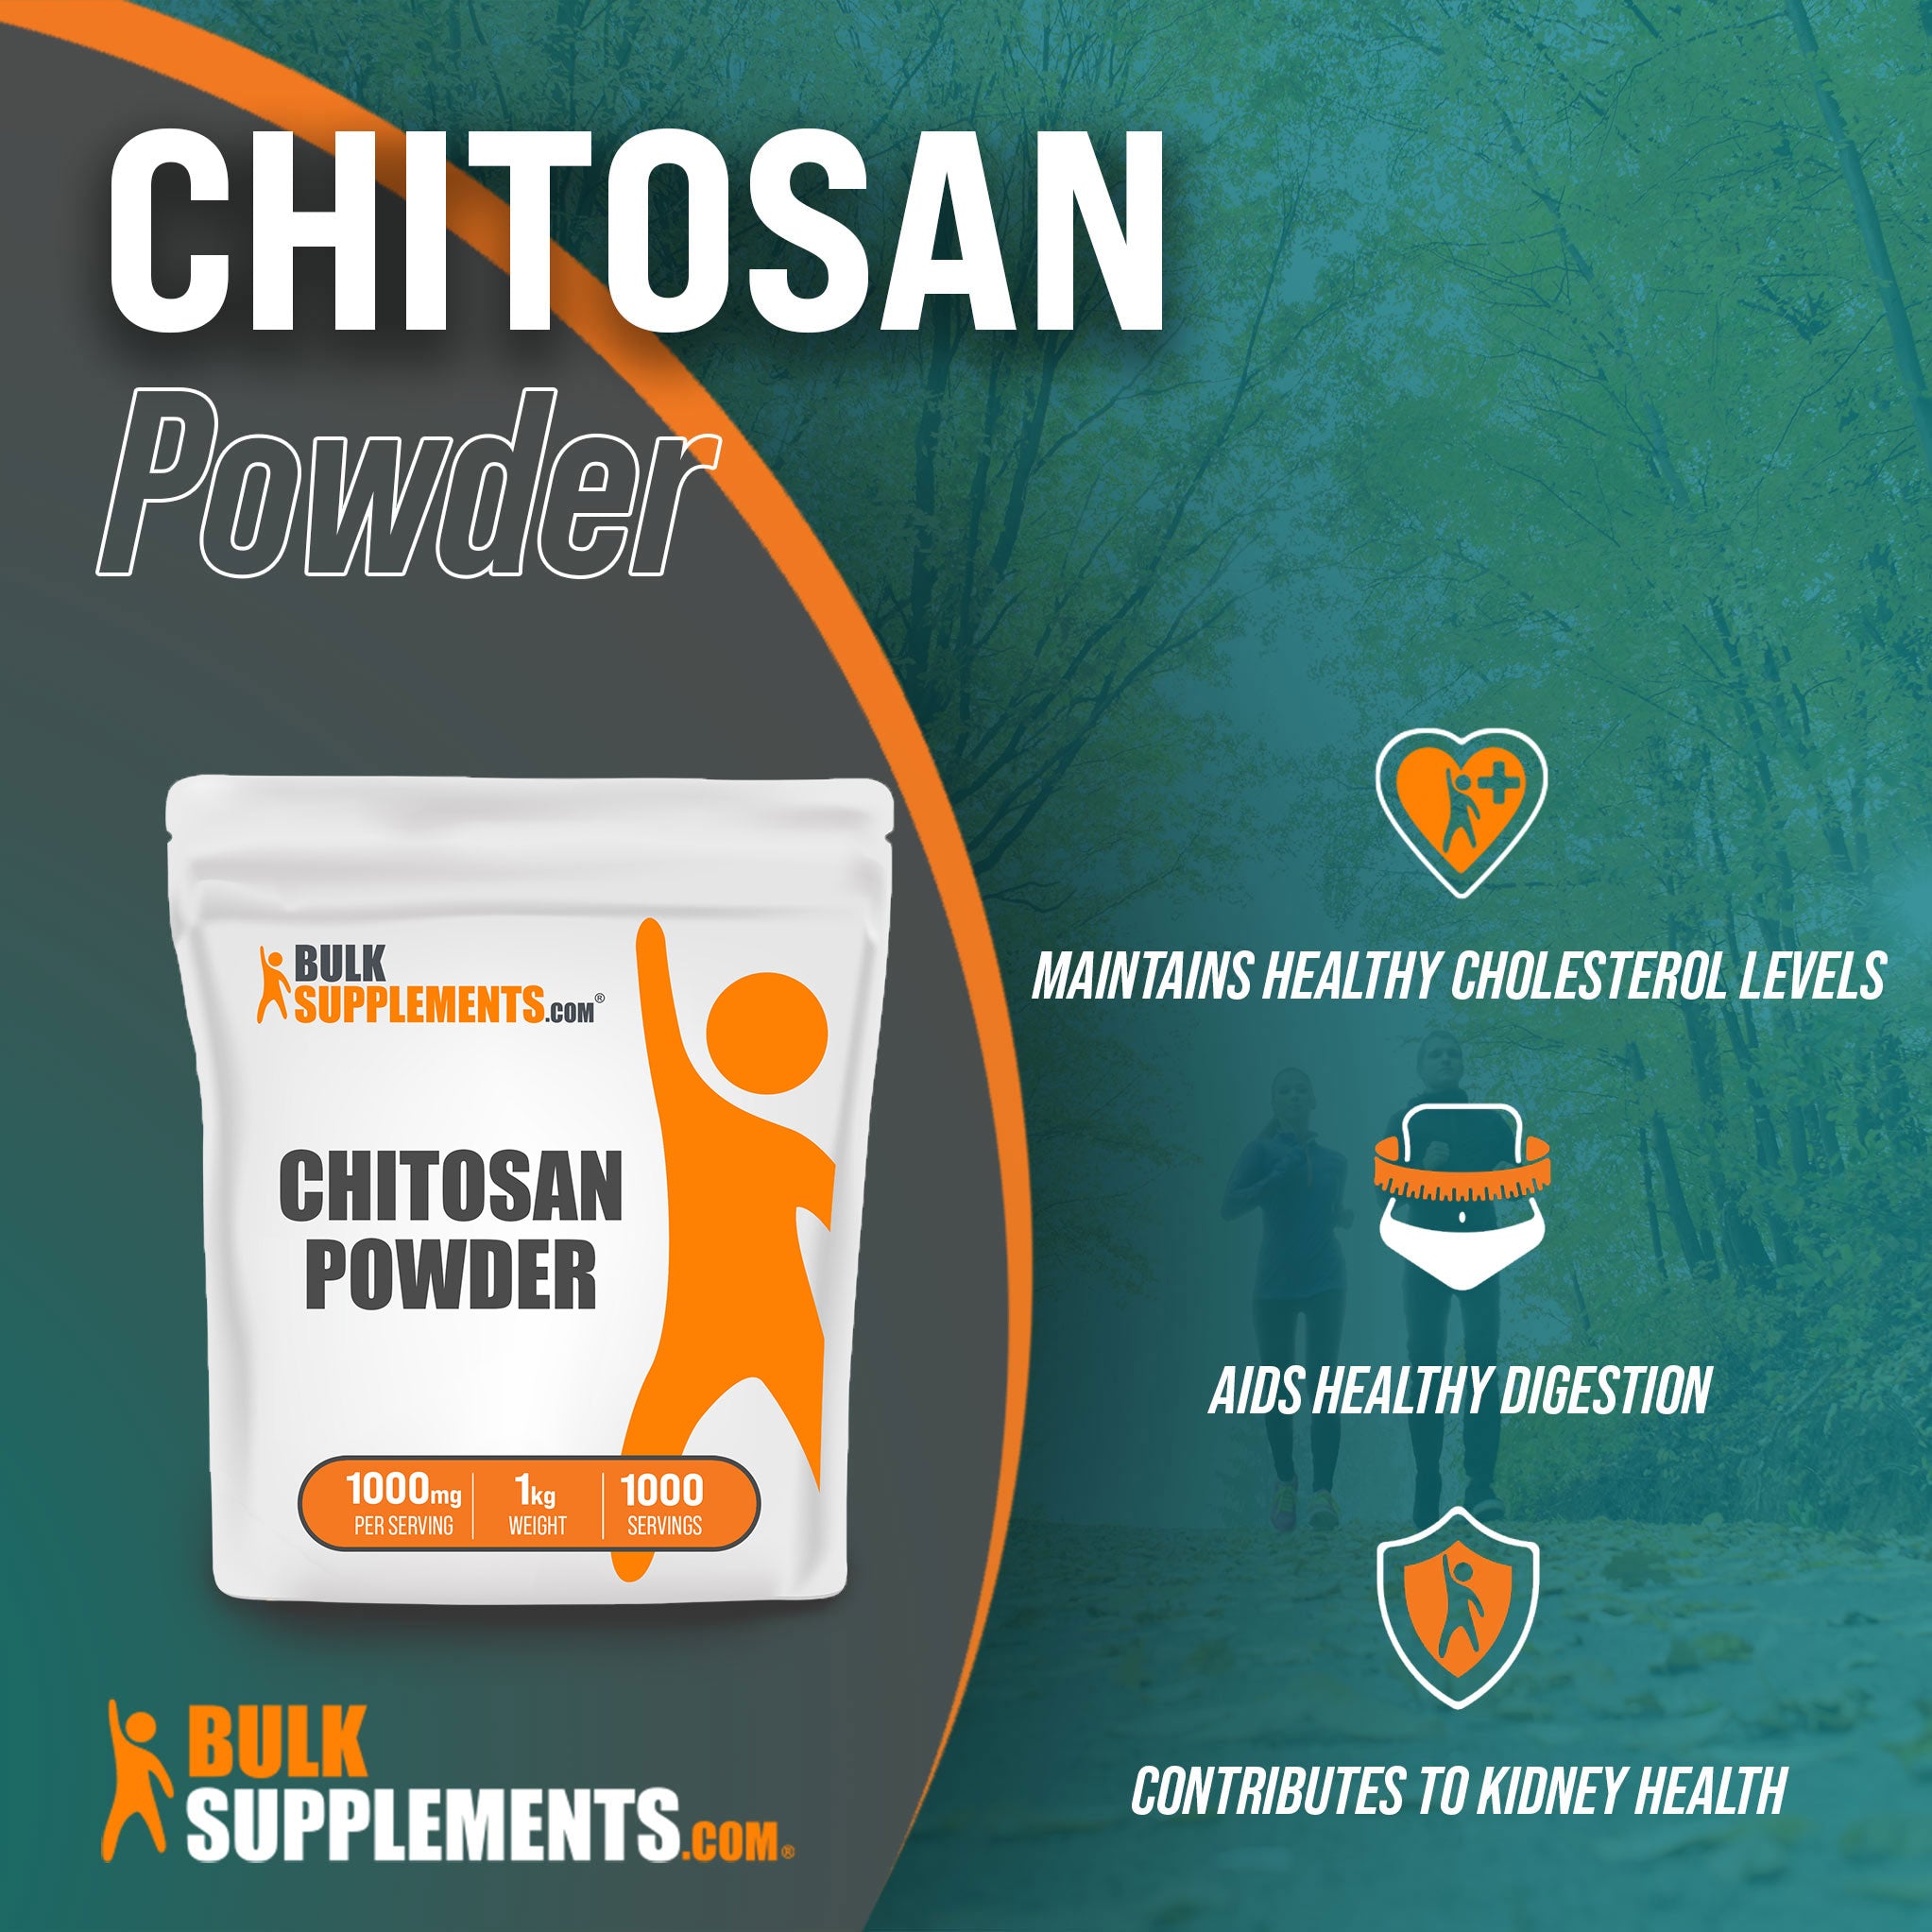 Benefits of 1kg Chitosan Powder fiber supplement; maintains healthy cholesterol levels, aids healthy digestion, contributes to kidney health